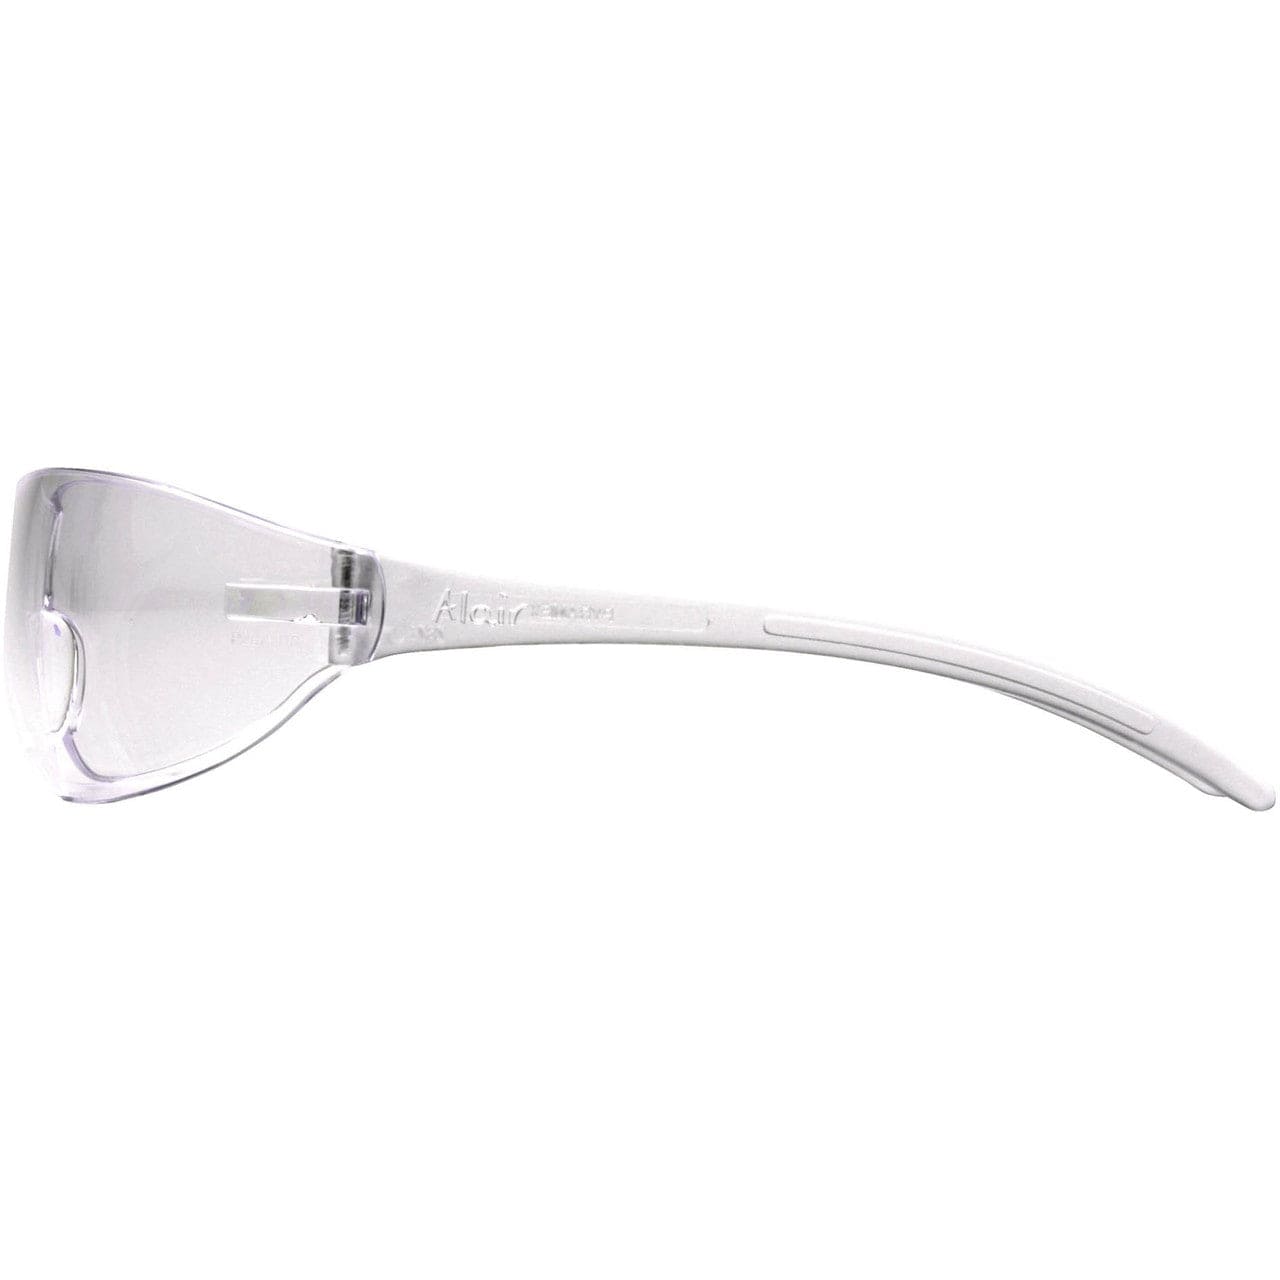 Pyramex Alair Safety Glasses with Clear Lens S3210S Side View